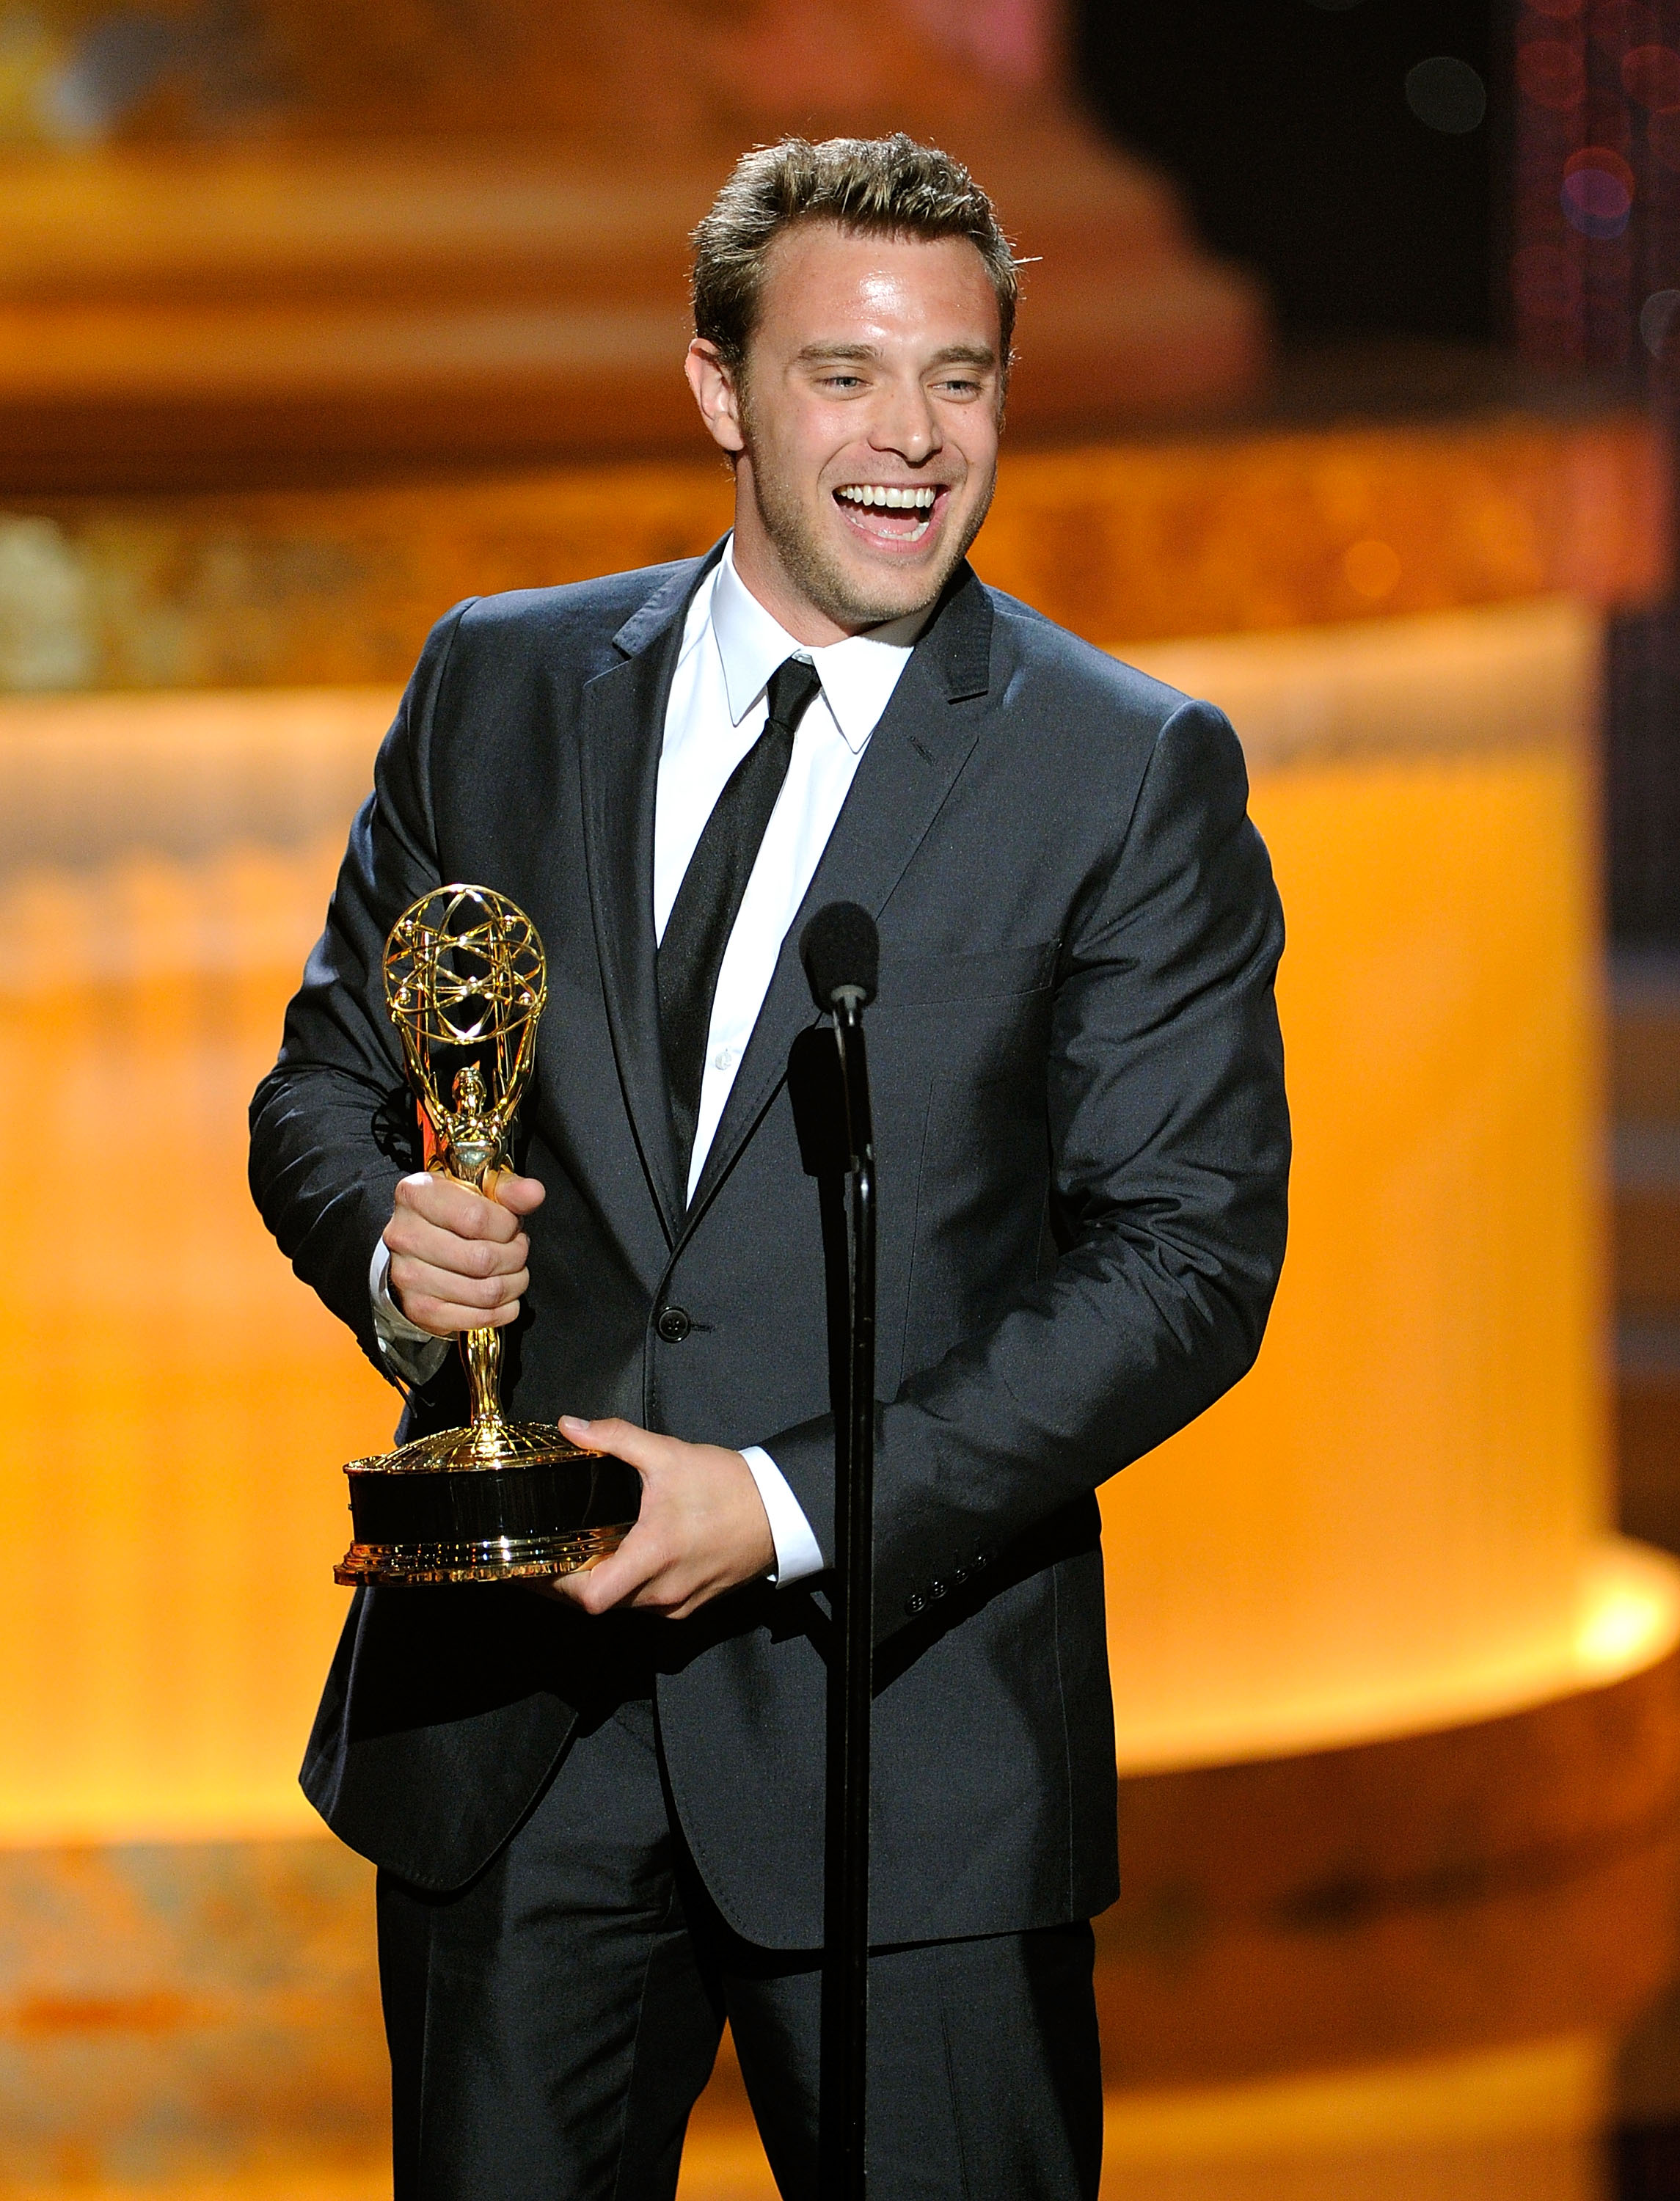 Billy Miller bei den 37th Annual Daytime Entertainment Emmy Awards in Las Vegas, 2010 | Quelle: Getty Images